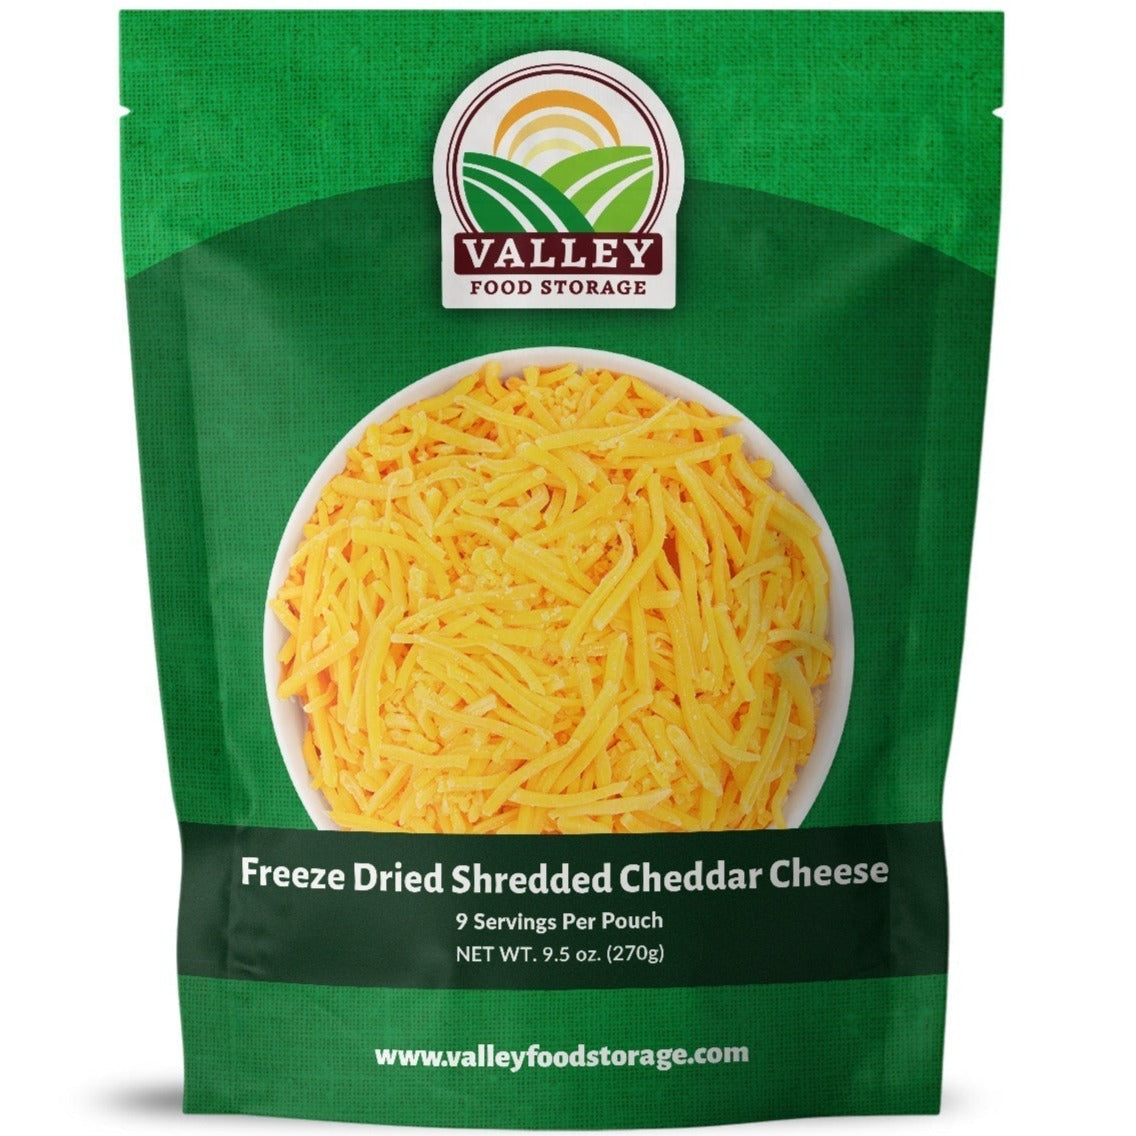 Freeze Dried Shredded Cheddar Cheese DAIRY From Valley Food Storage